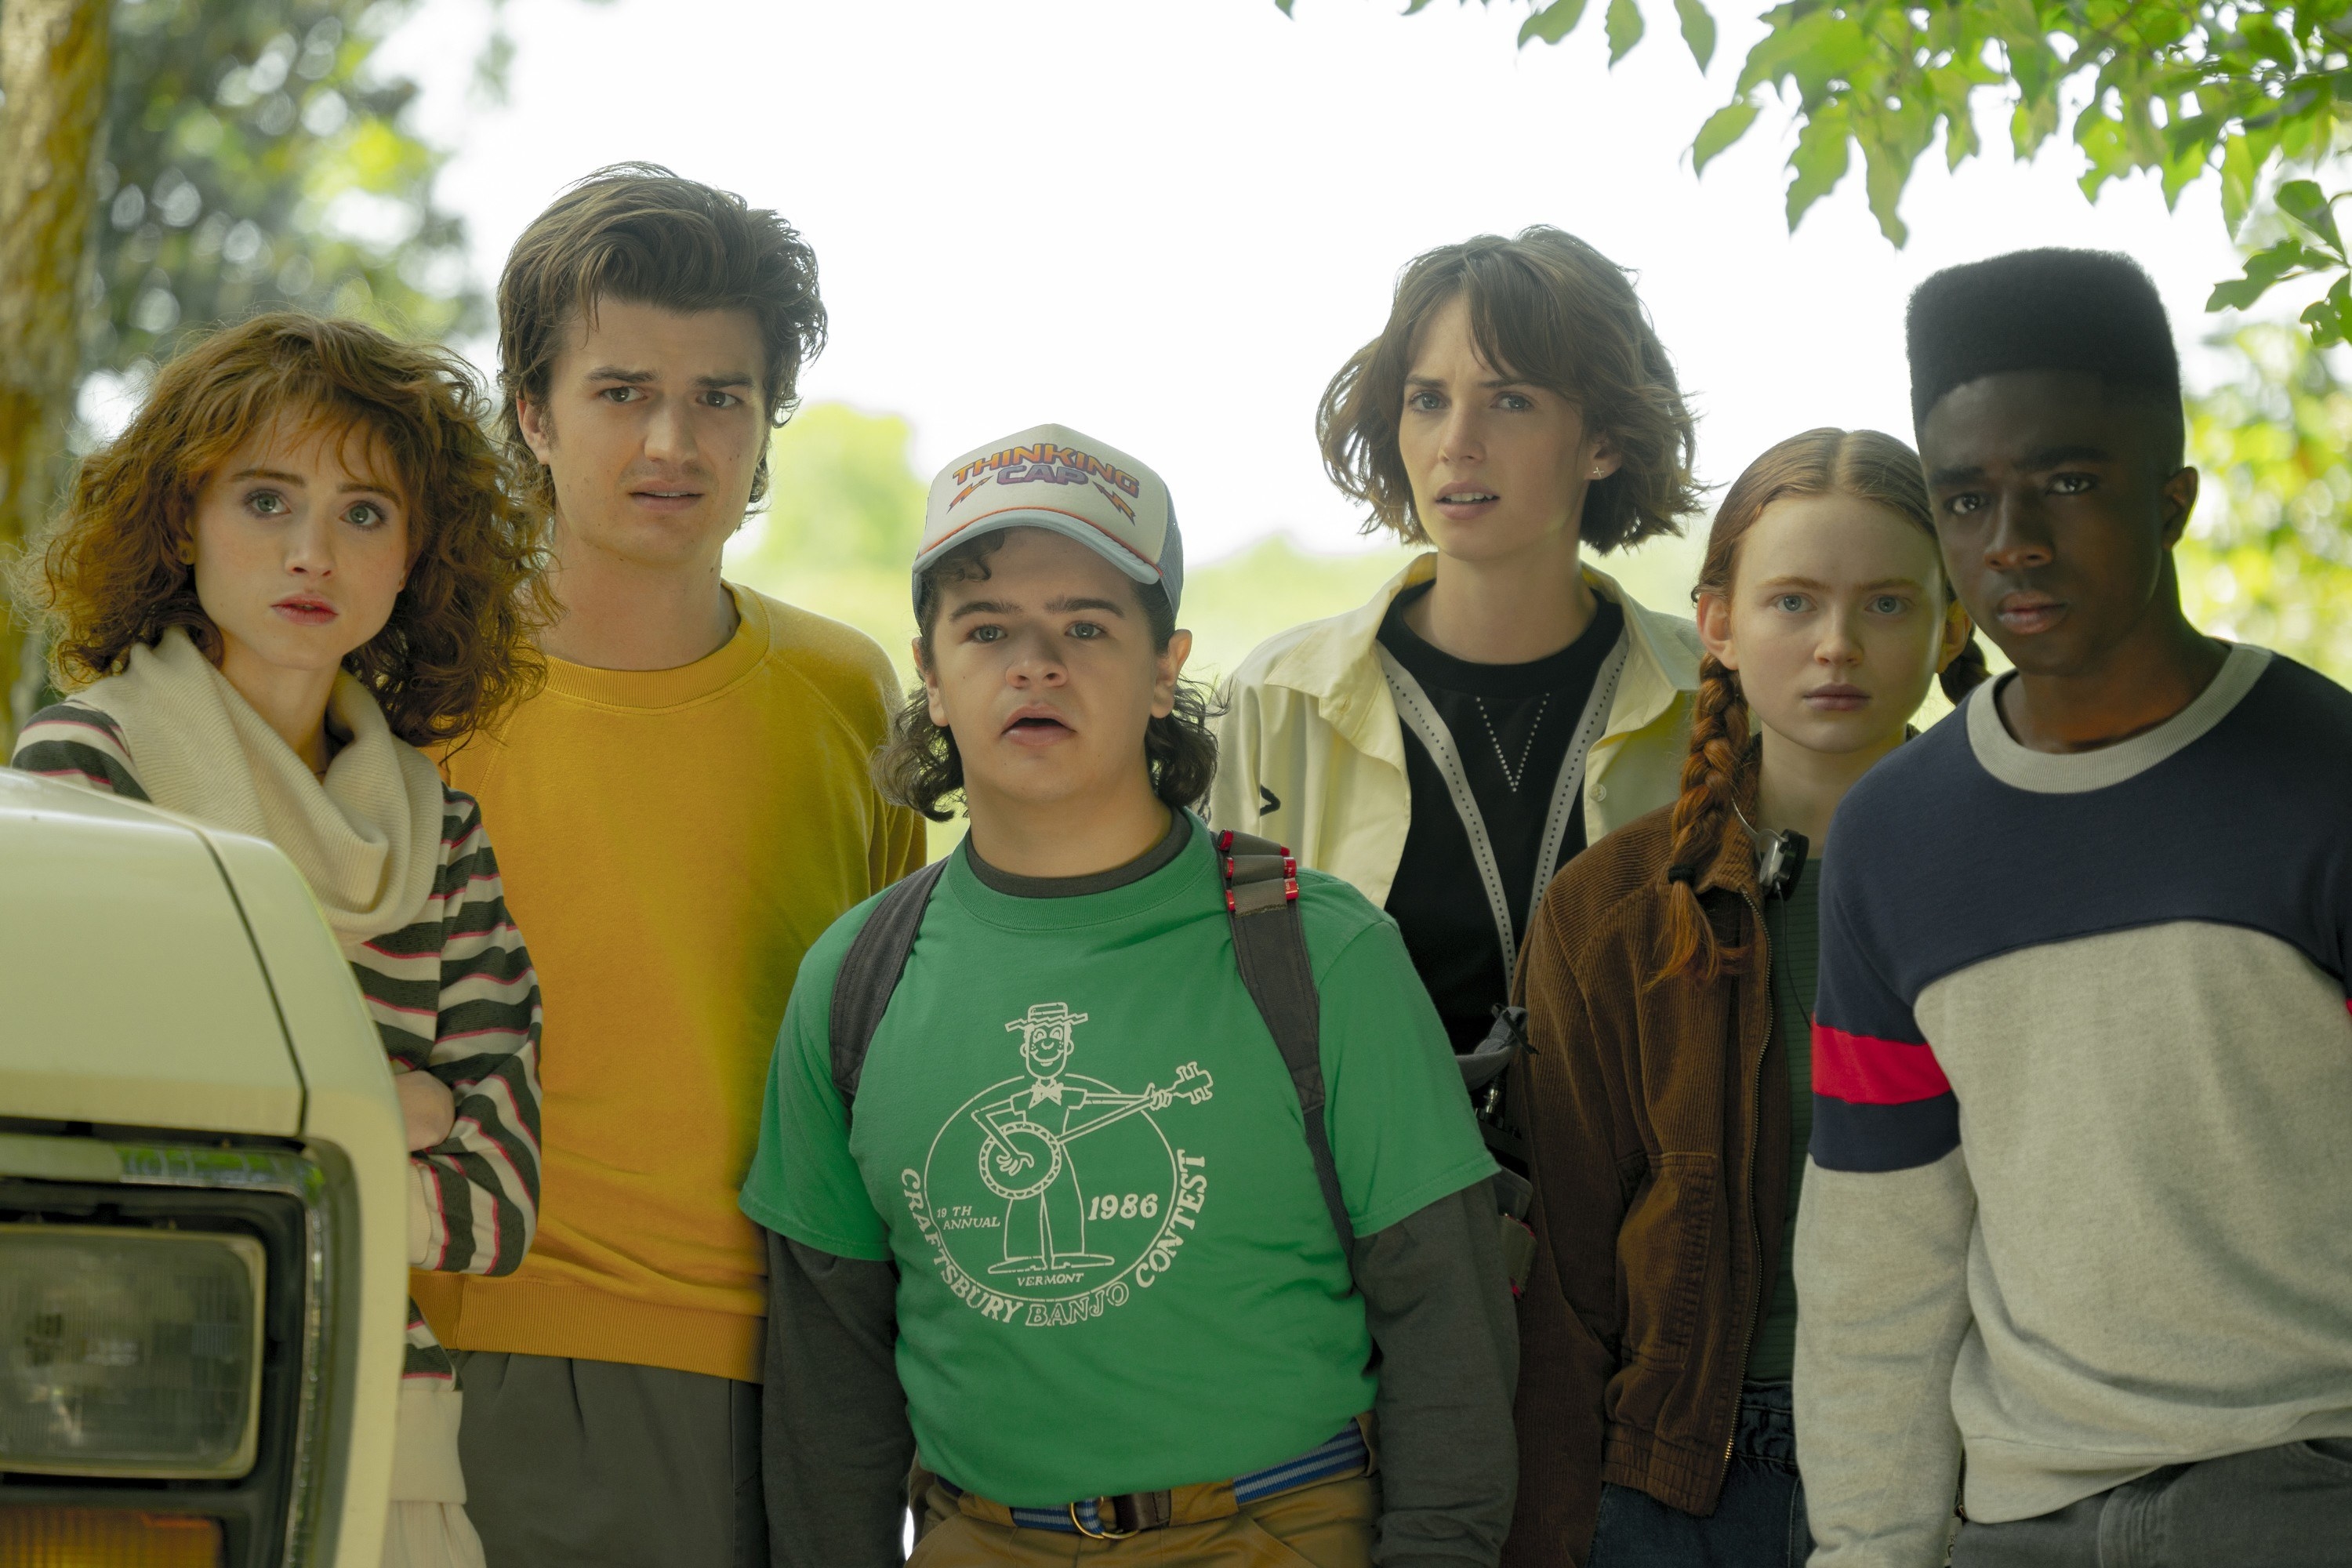 the kids from &quot;Stranger Things&quot; standing outside and looking at something together